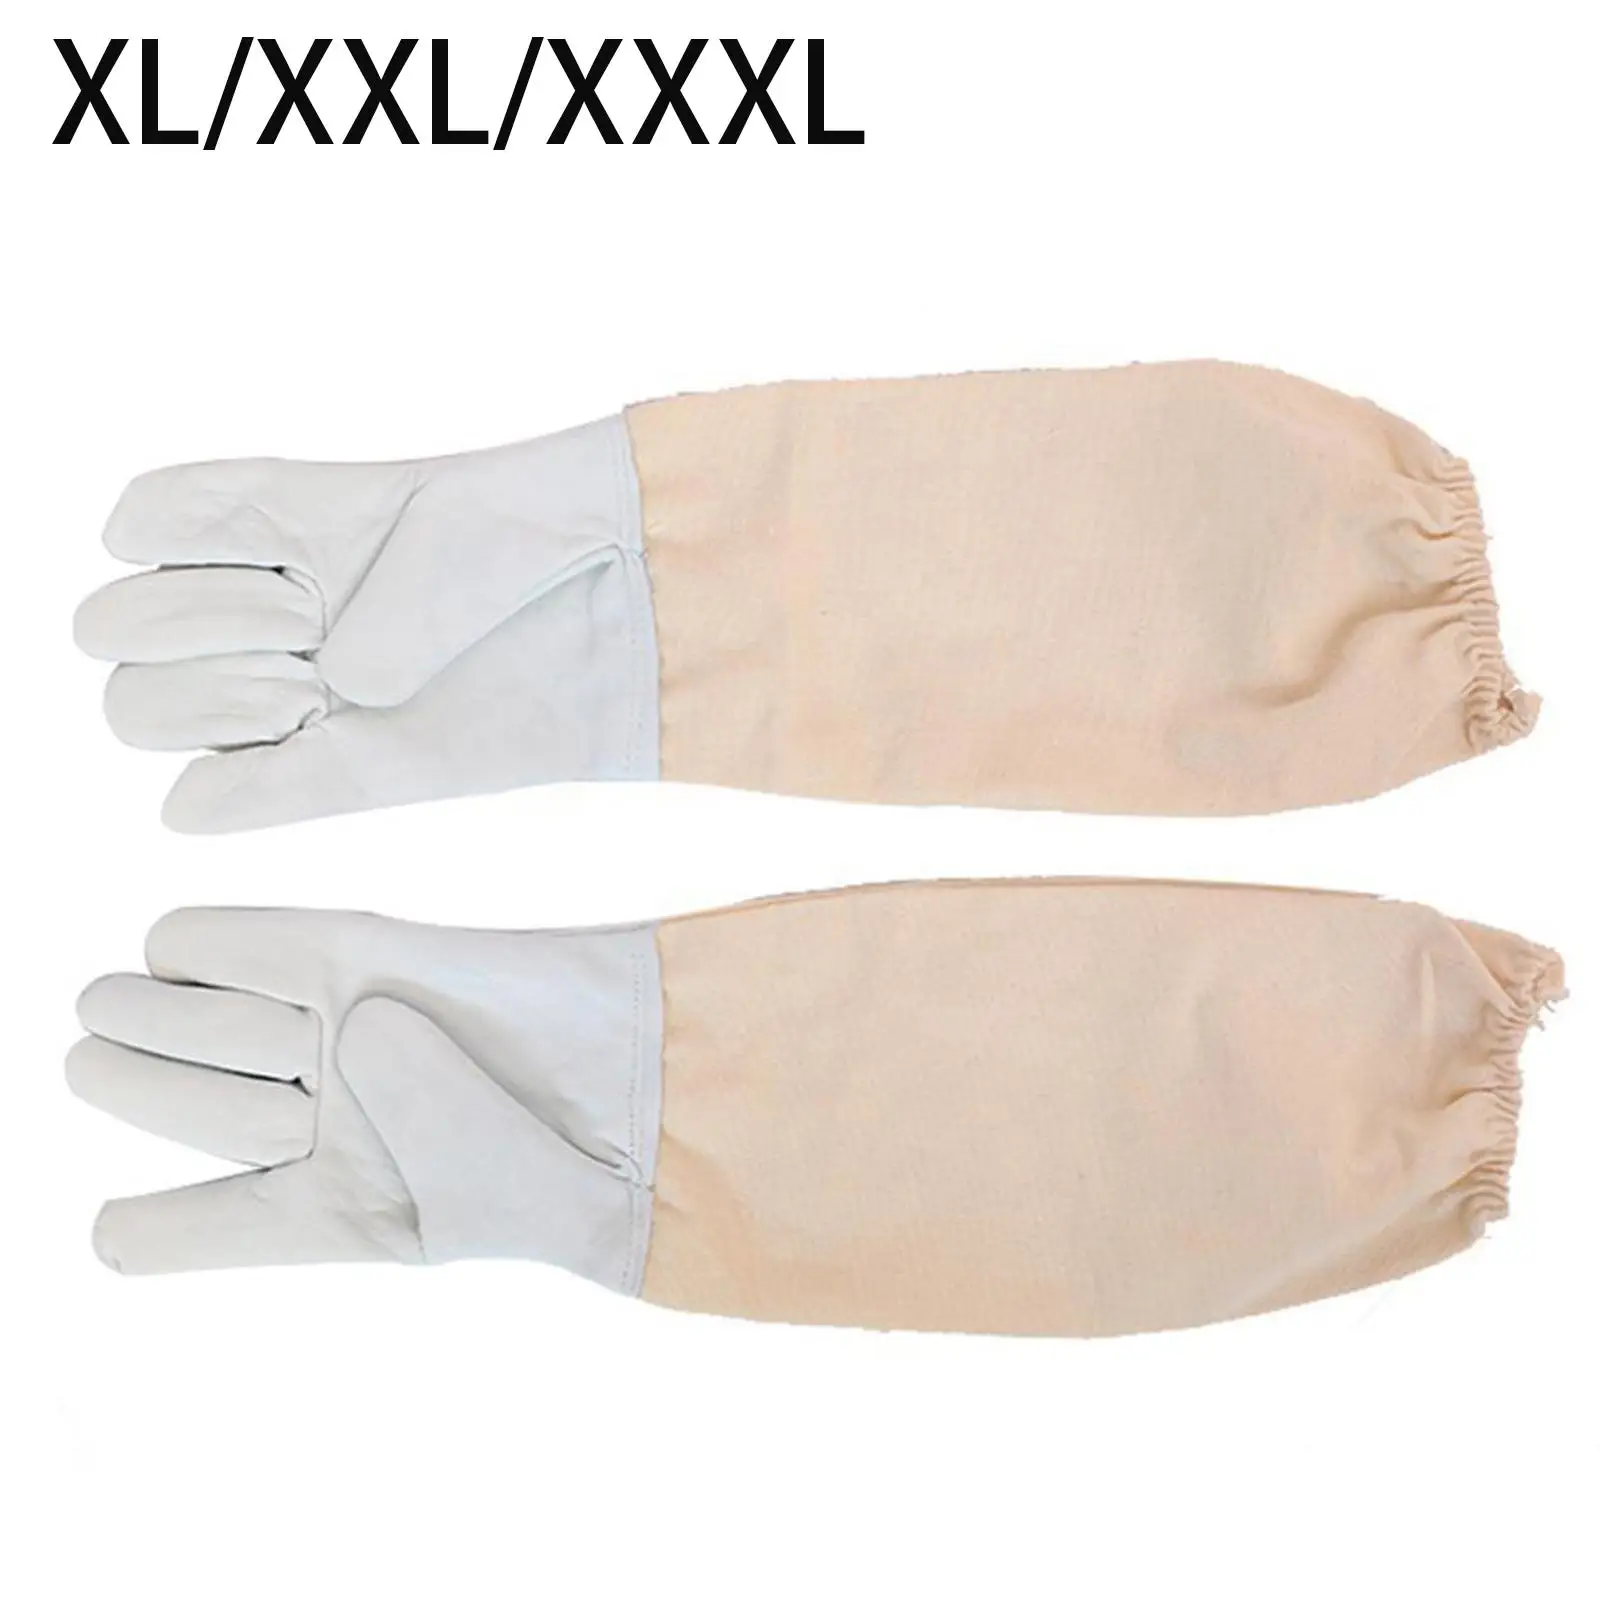 Beekeeping Gloves Anti Bee Gloves for Gardening Apiculture Tools Unisex